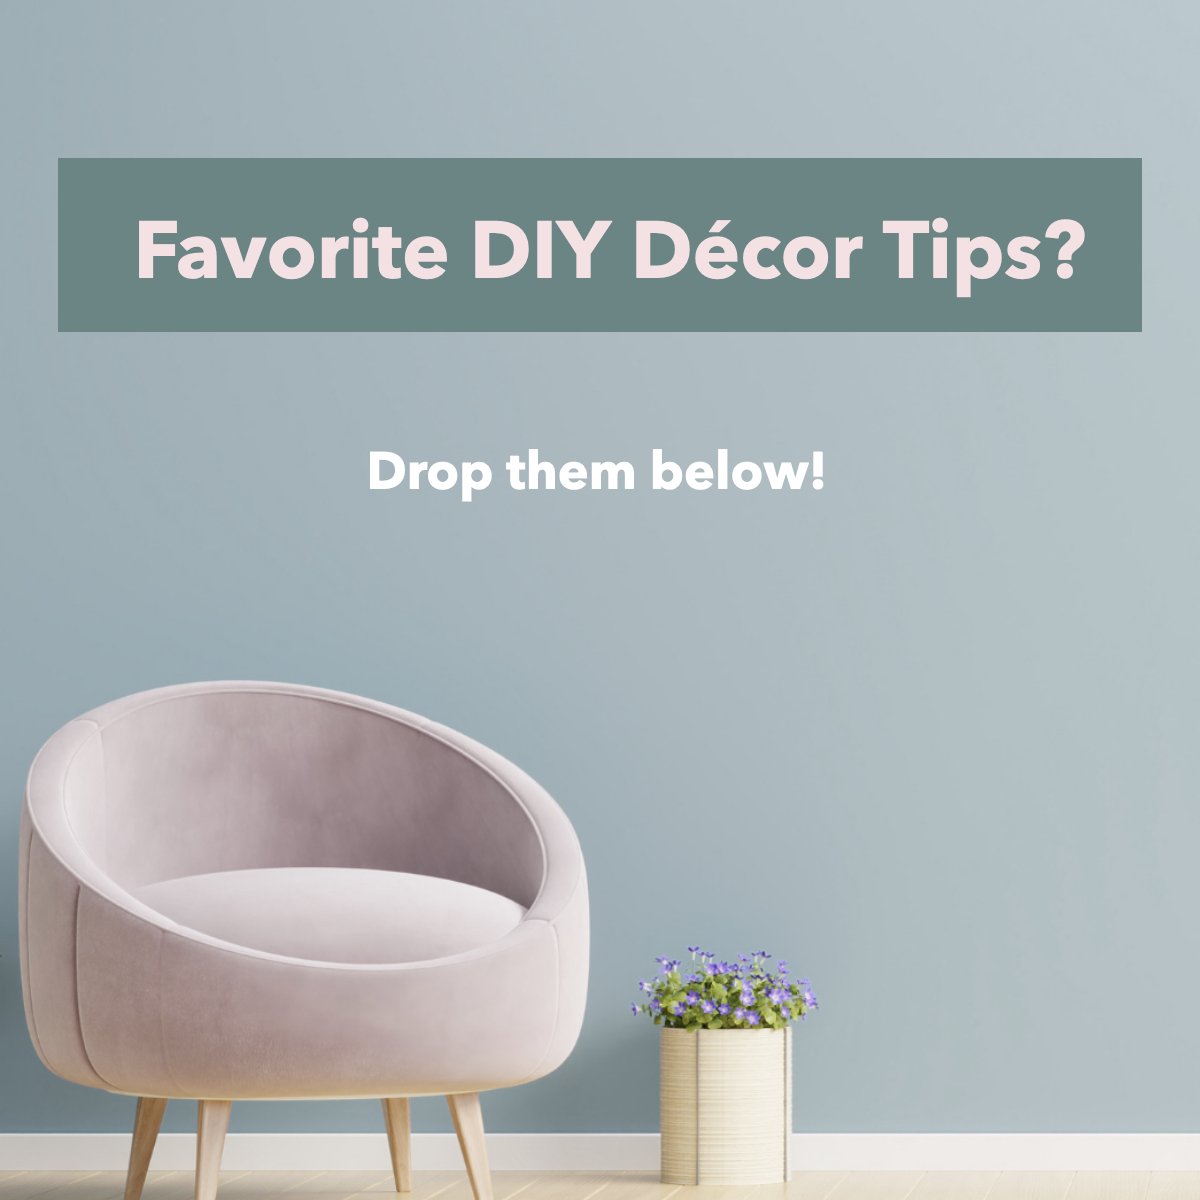 We want you to share your tips with us!!!

Drop them in the comments 💭! 

#DIY    #Question    #Interiordesign    #designtips    #DIYdecor
#soldbysylvia #sellwithsylvia #thehelpfulagent #theknowledgebroker #icanhelp #realestateagent #houseexpert